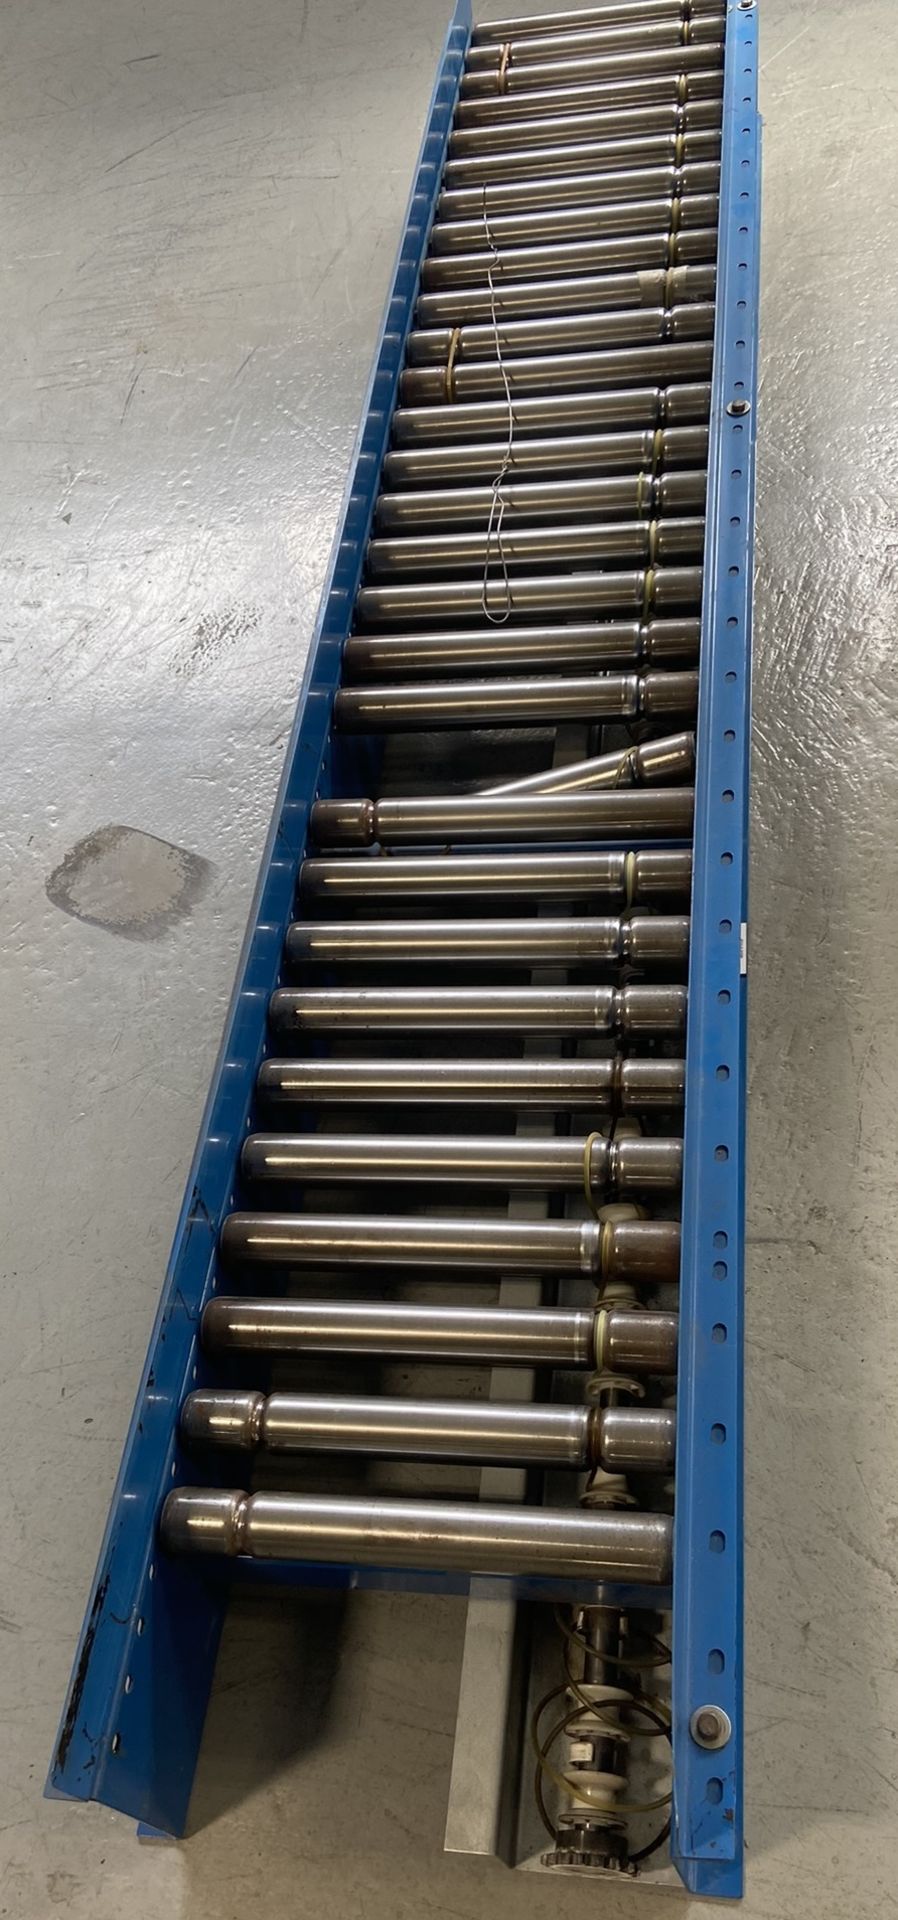 Gravity Roller Conveyors - Multiple (20+) - Image 14 of 21